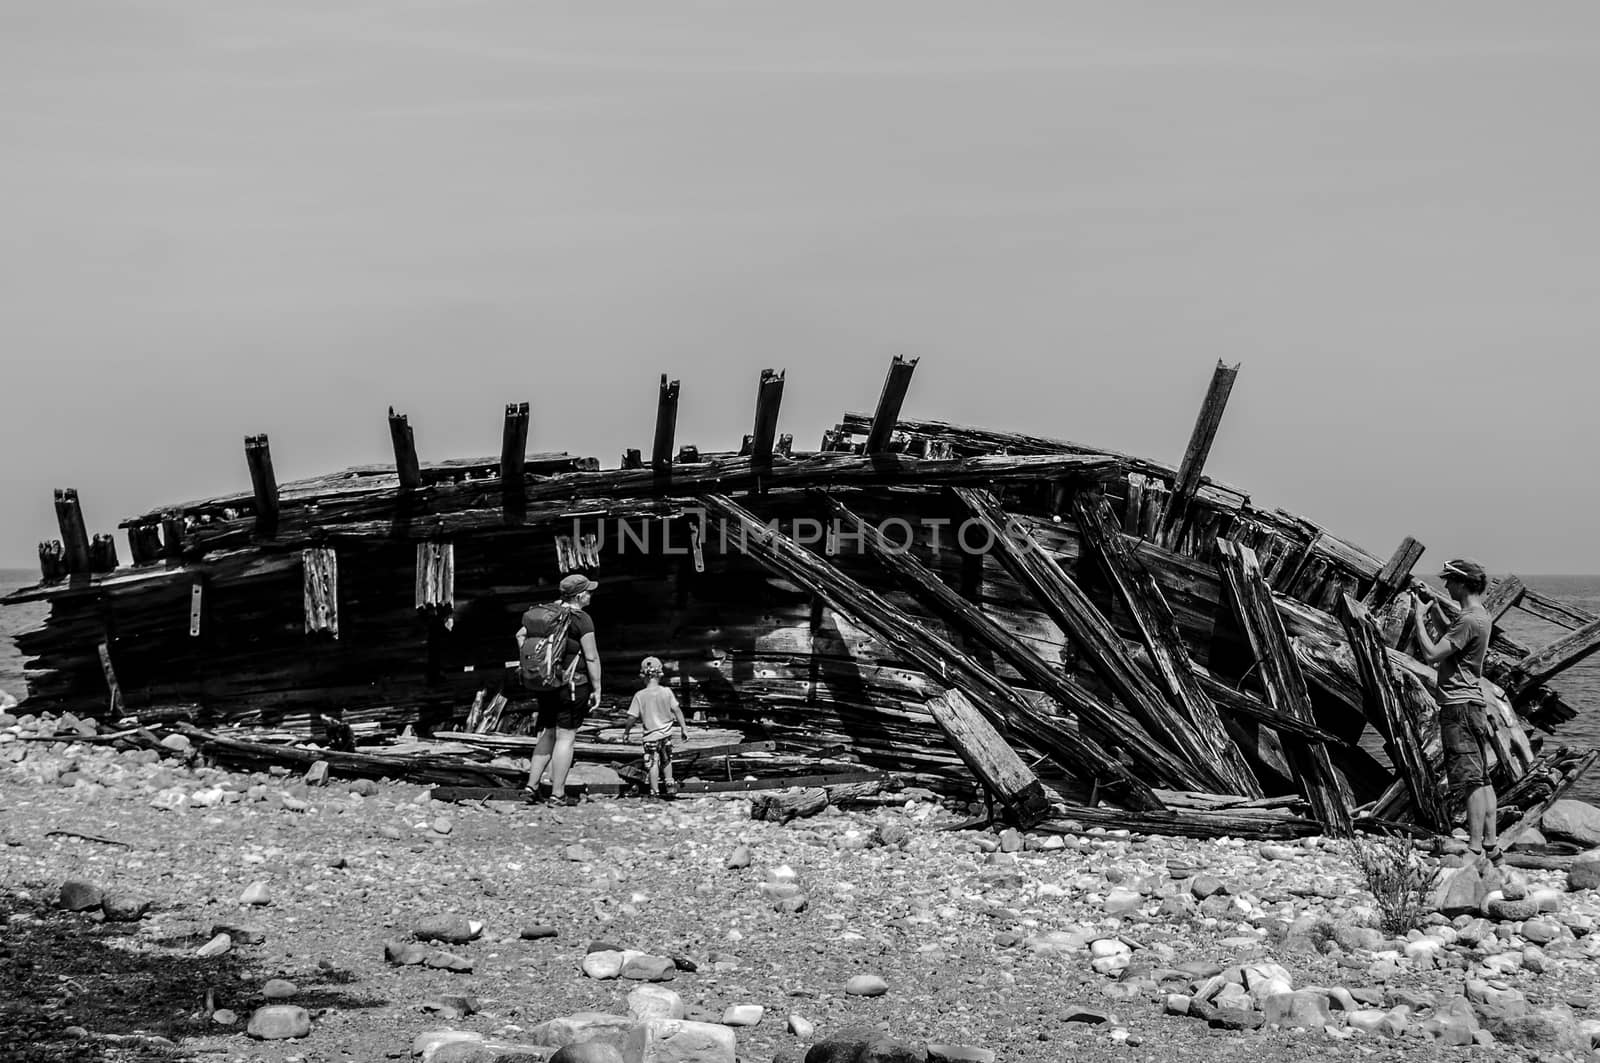 An abandoned wooden boat by the coast